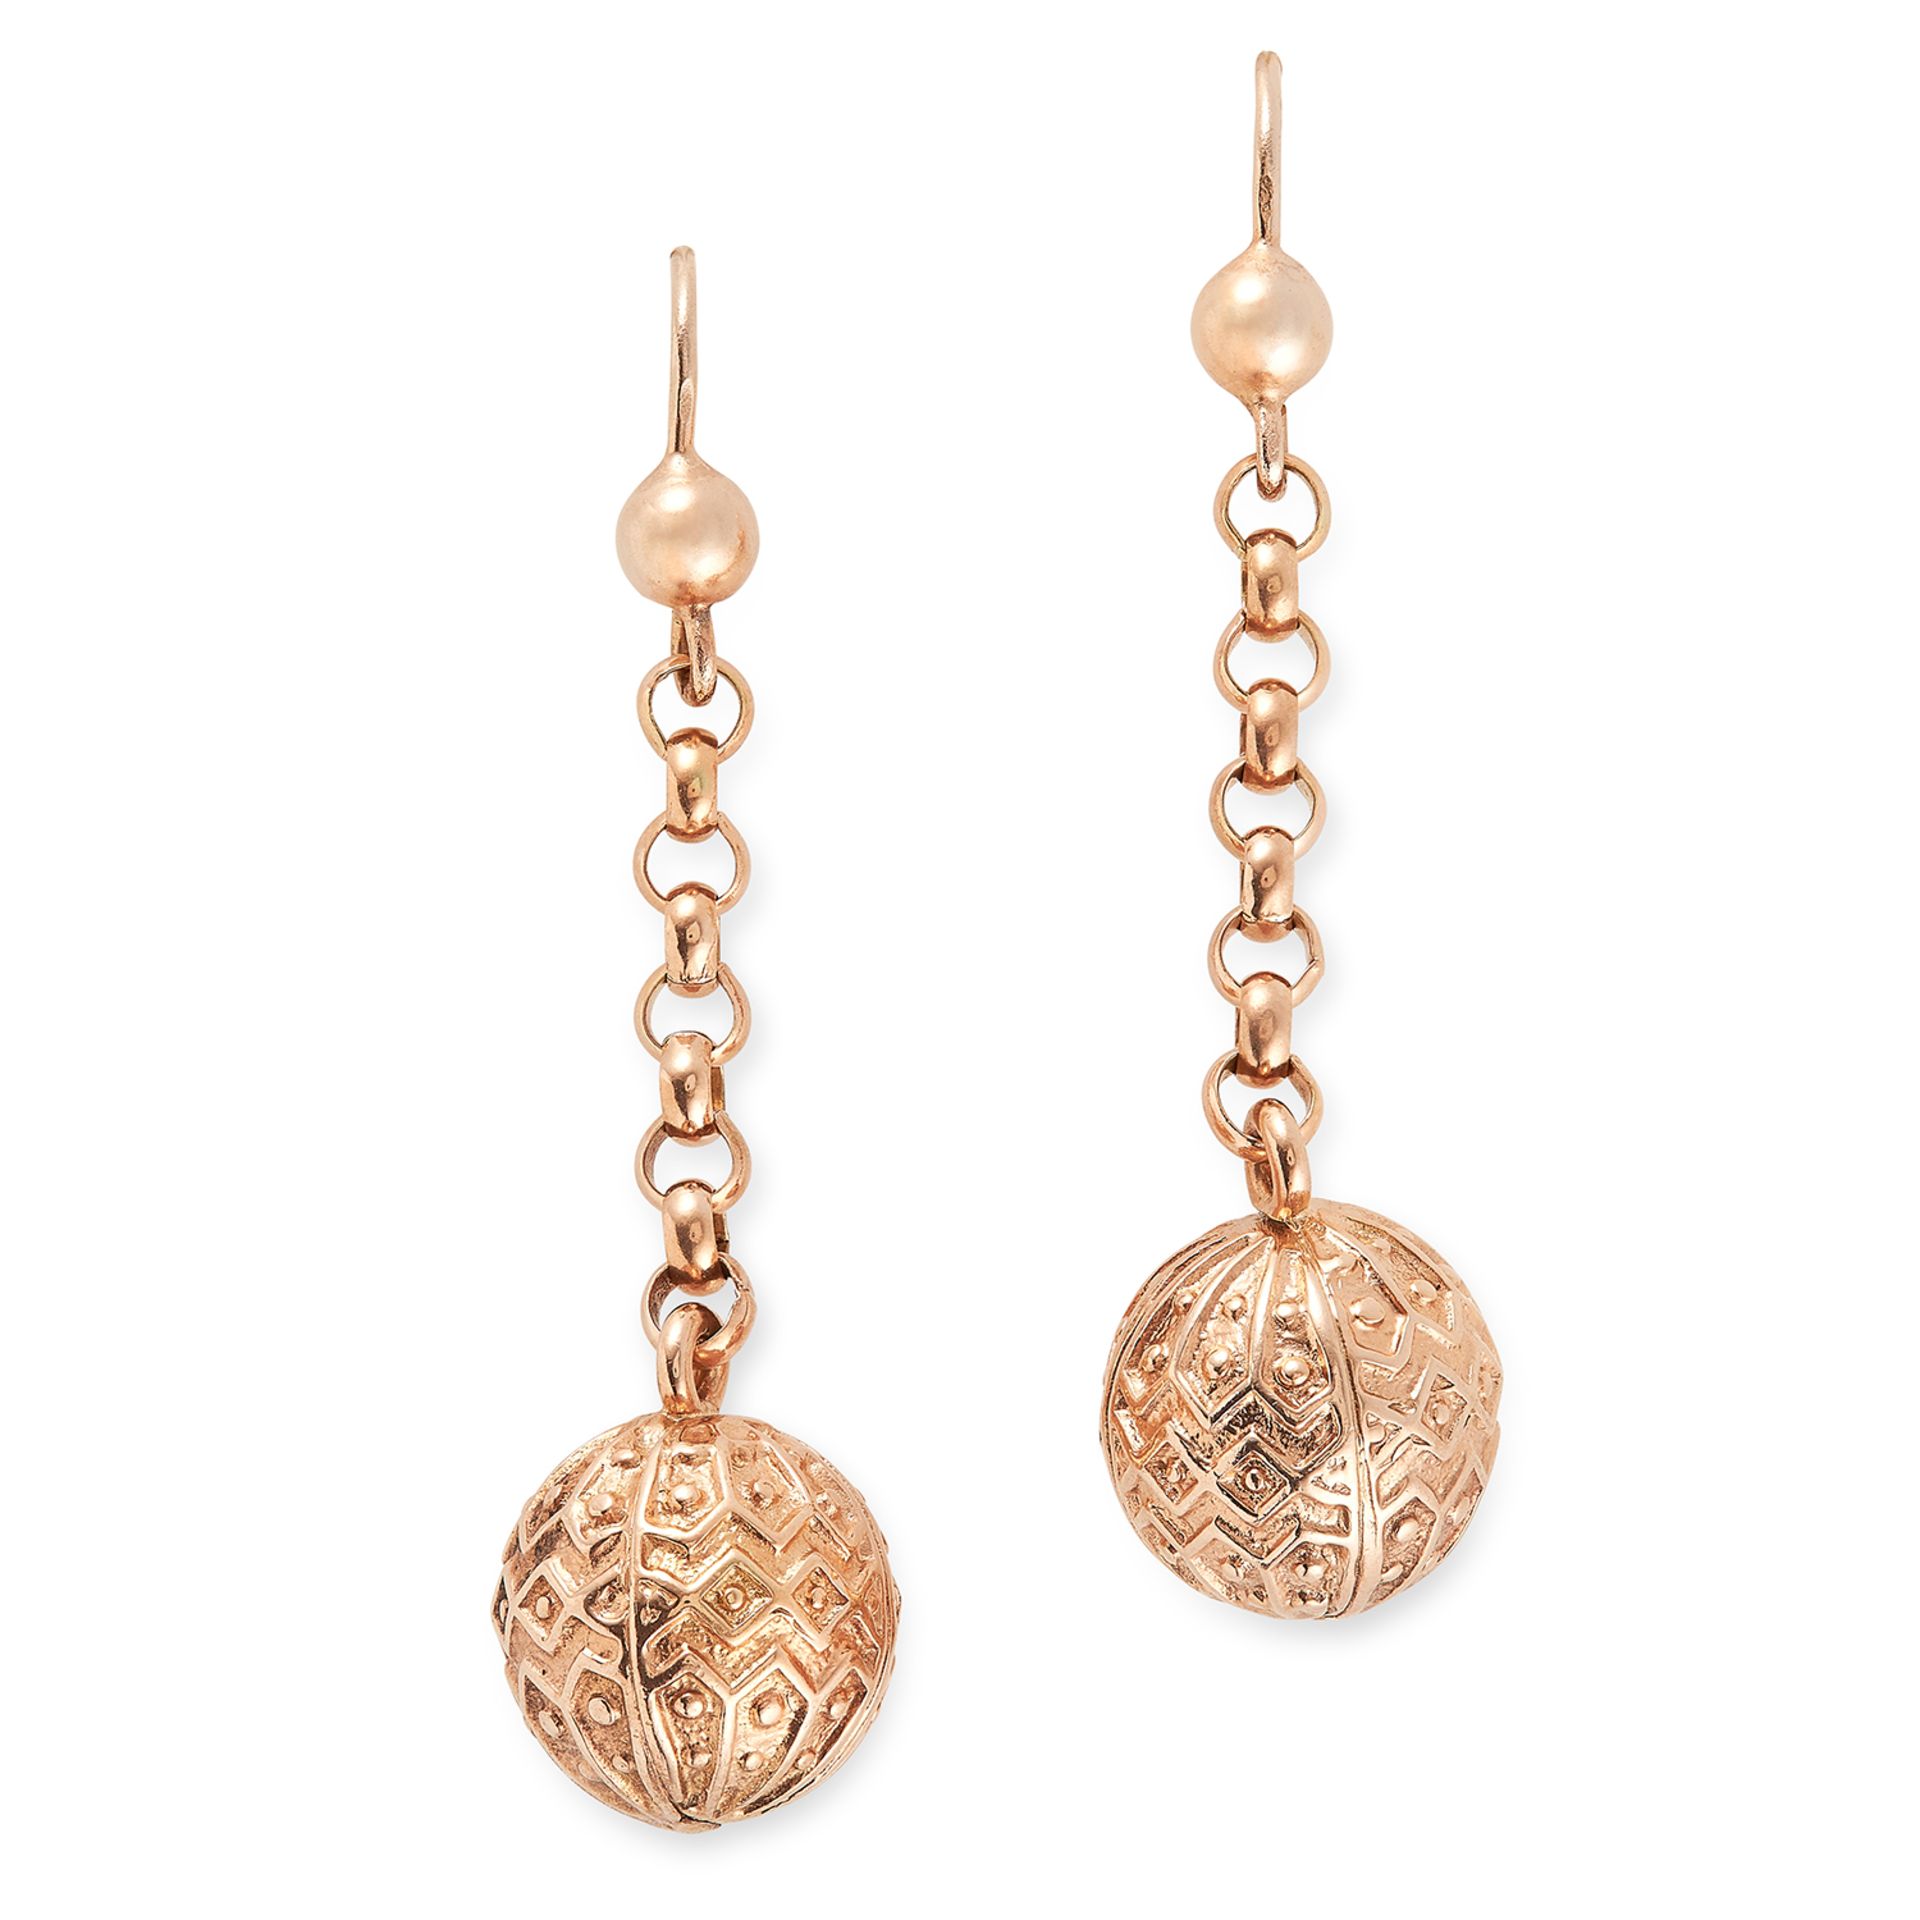 ANTIQUE GOLD DROP EARRINGS set with ornate gold beads, 4.5cm, 7.2g.